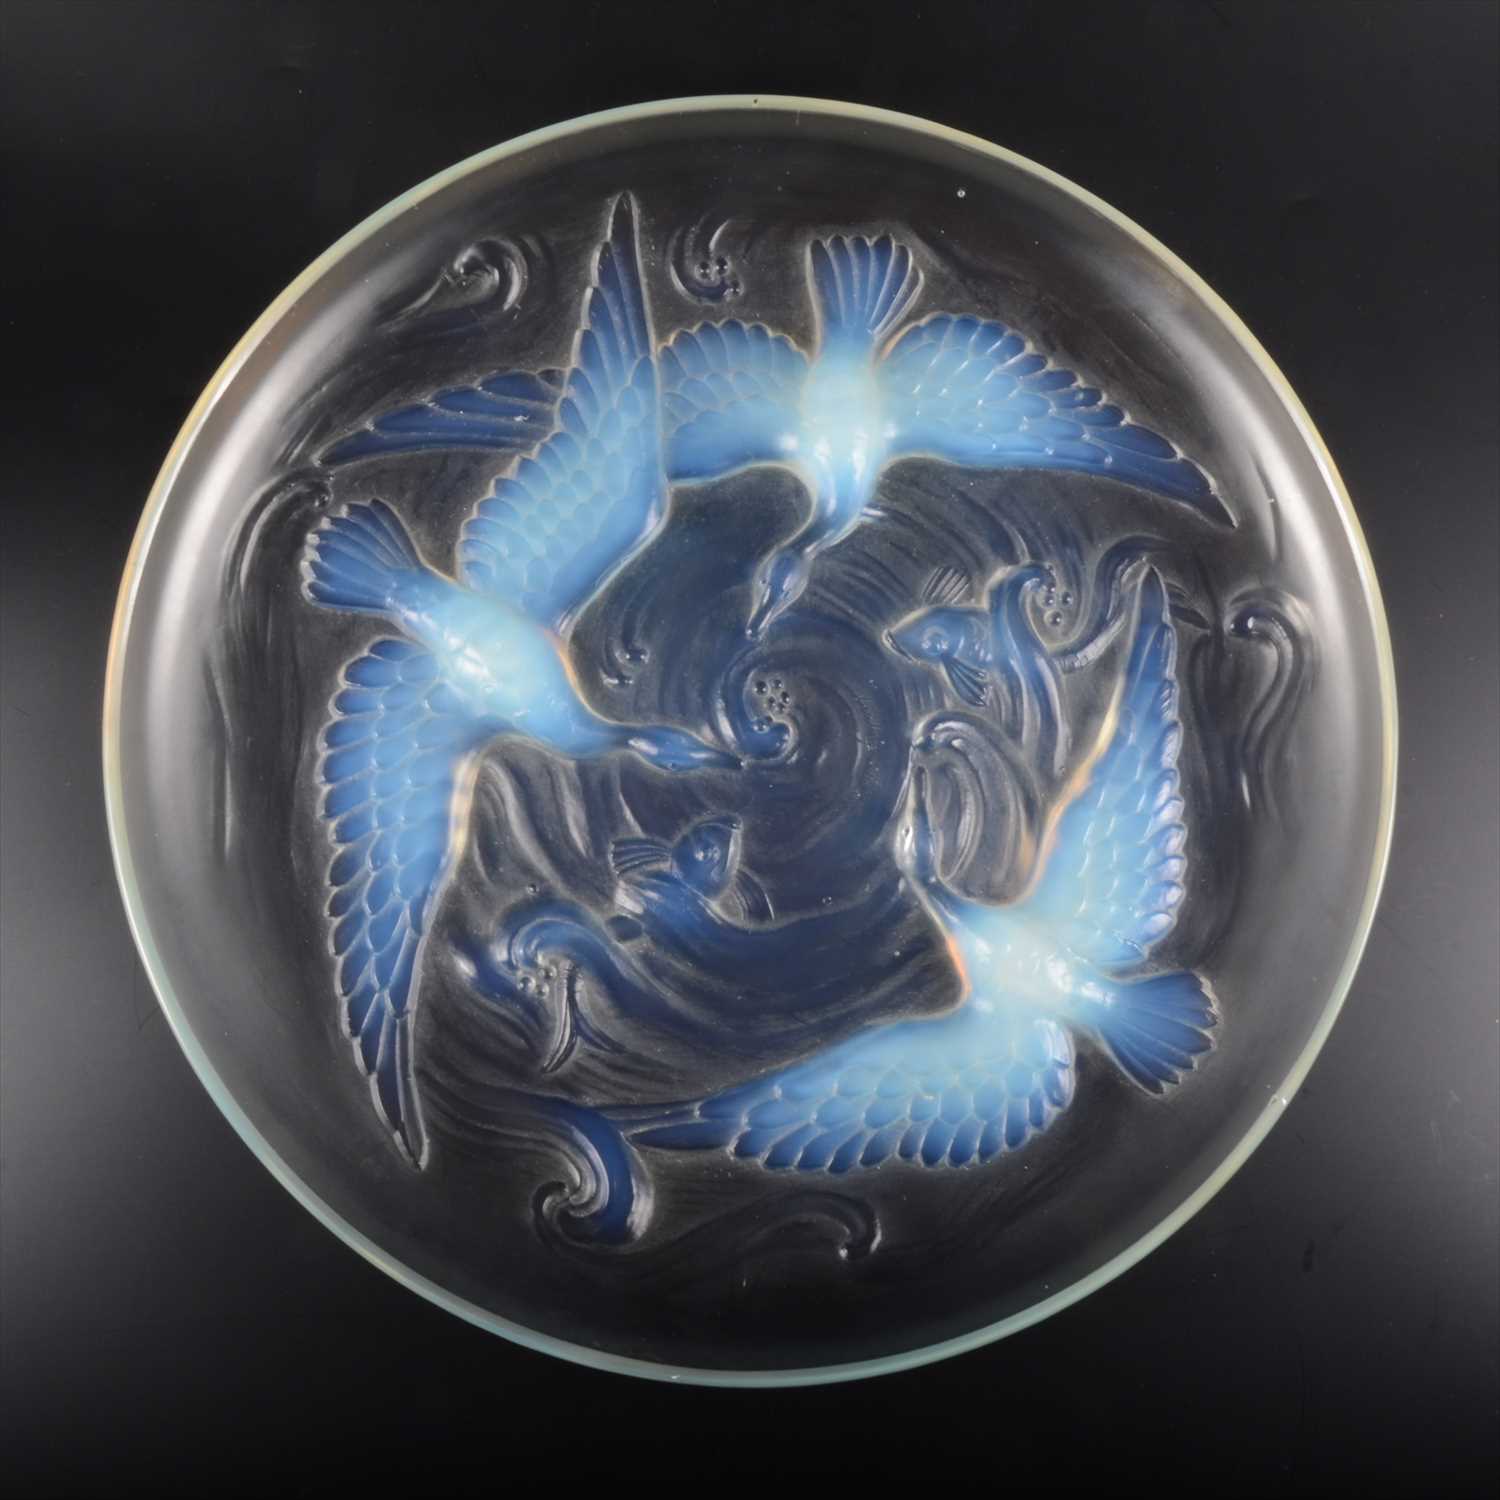 Lot 113 - An Art Deco opalescent glass charger, by Verlys.